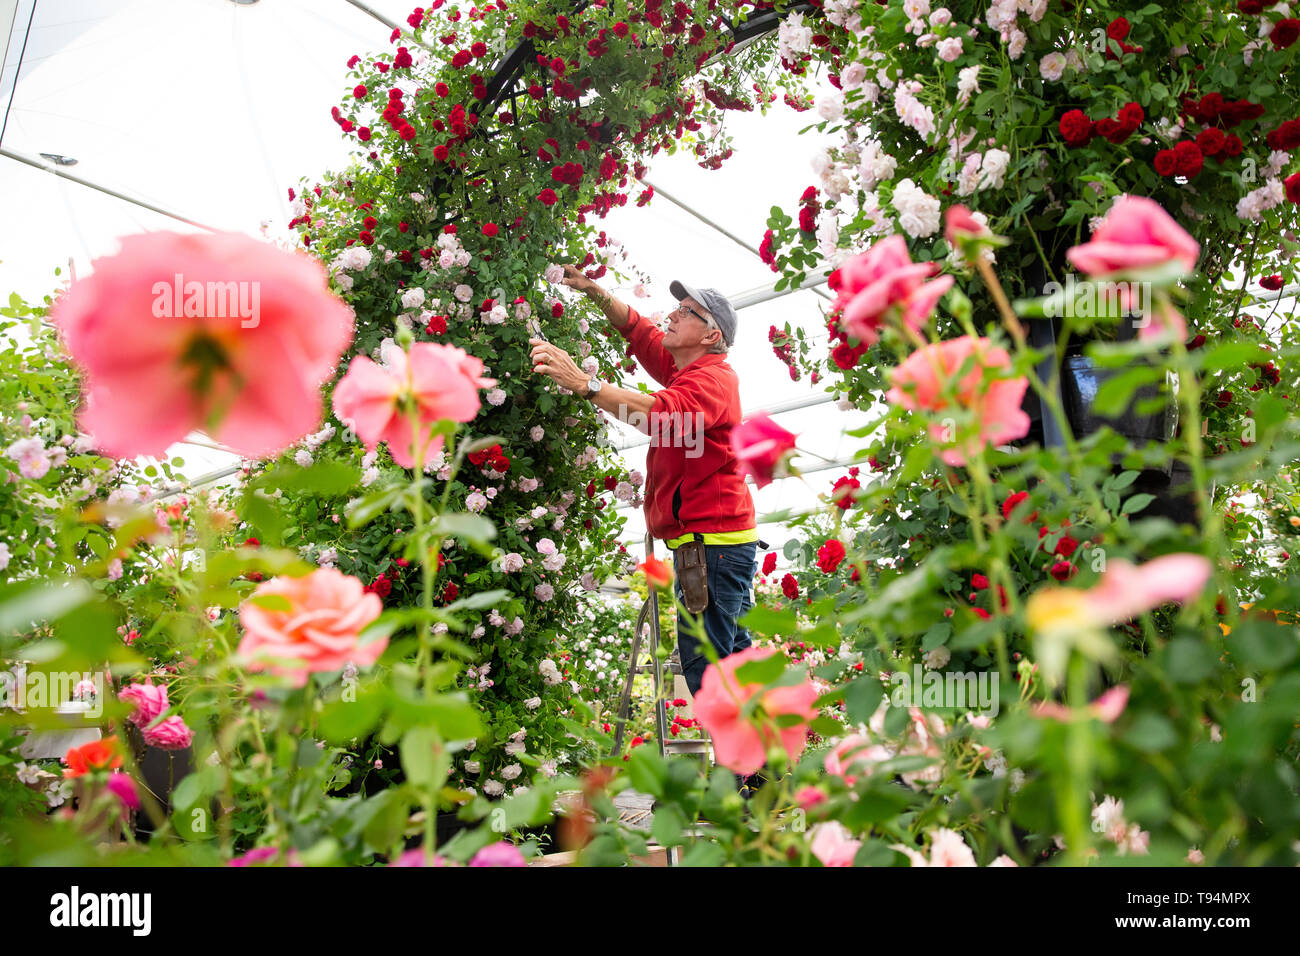 A man prunes roses during preparations for the RHS Chelsea Flower Show at the Royal Hospital Chelsea, London. Stock Photo